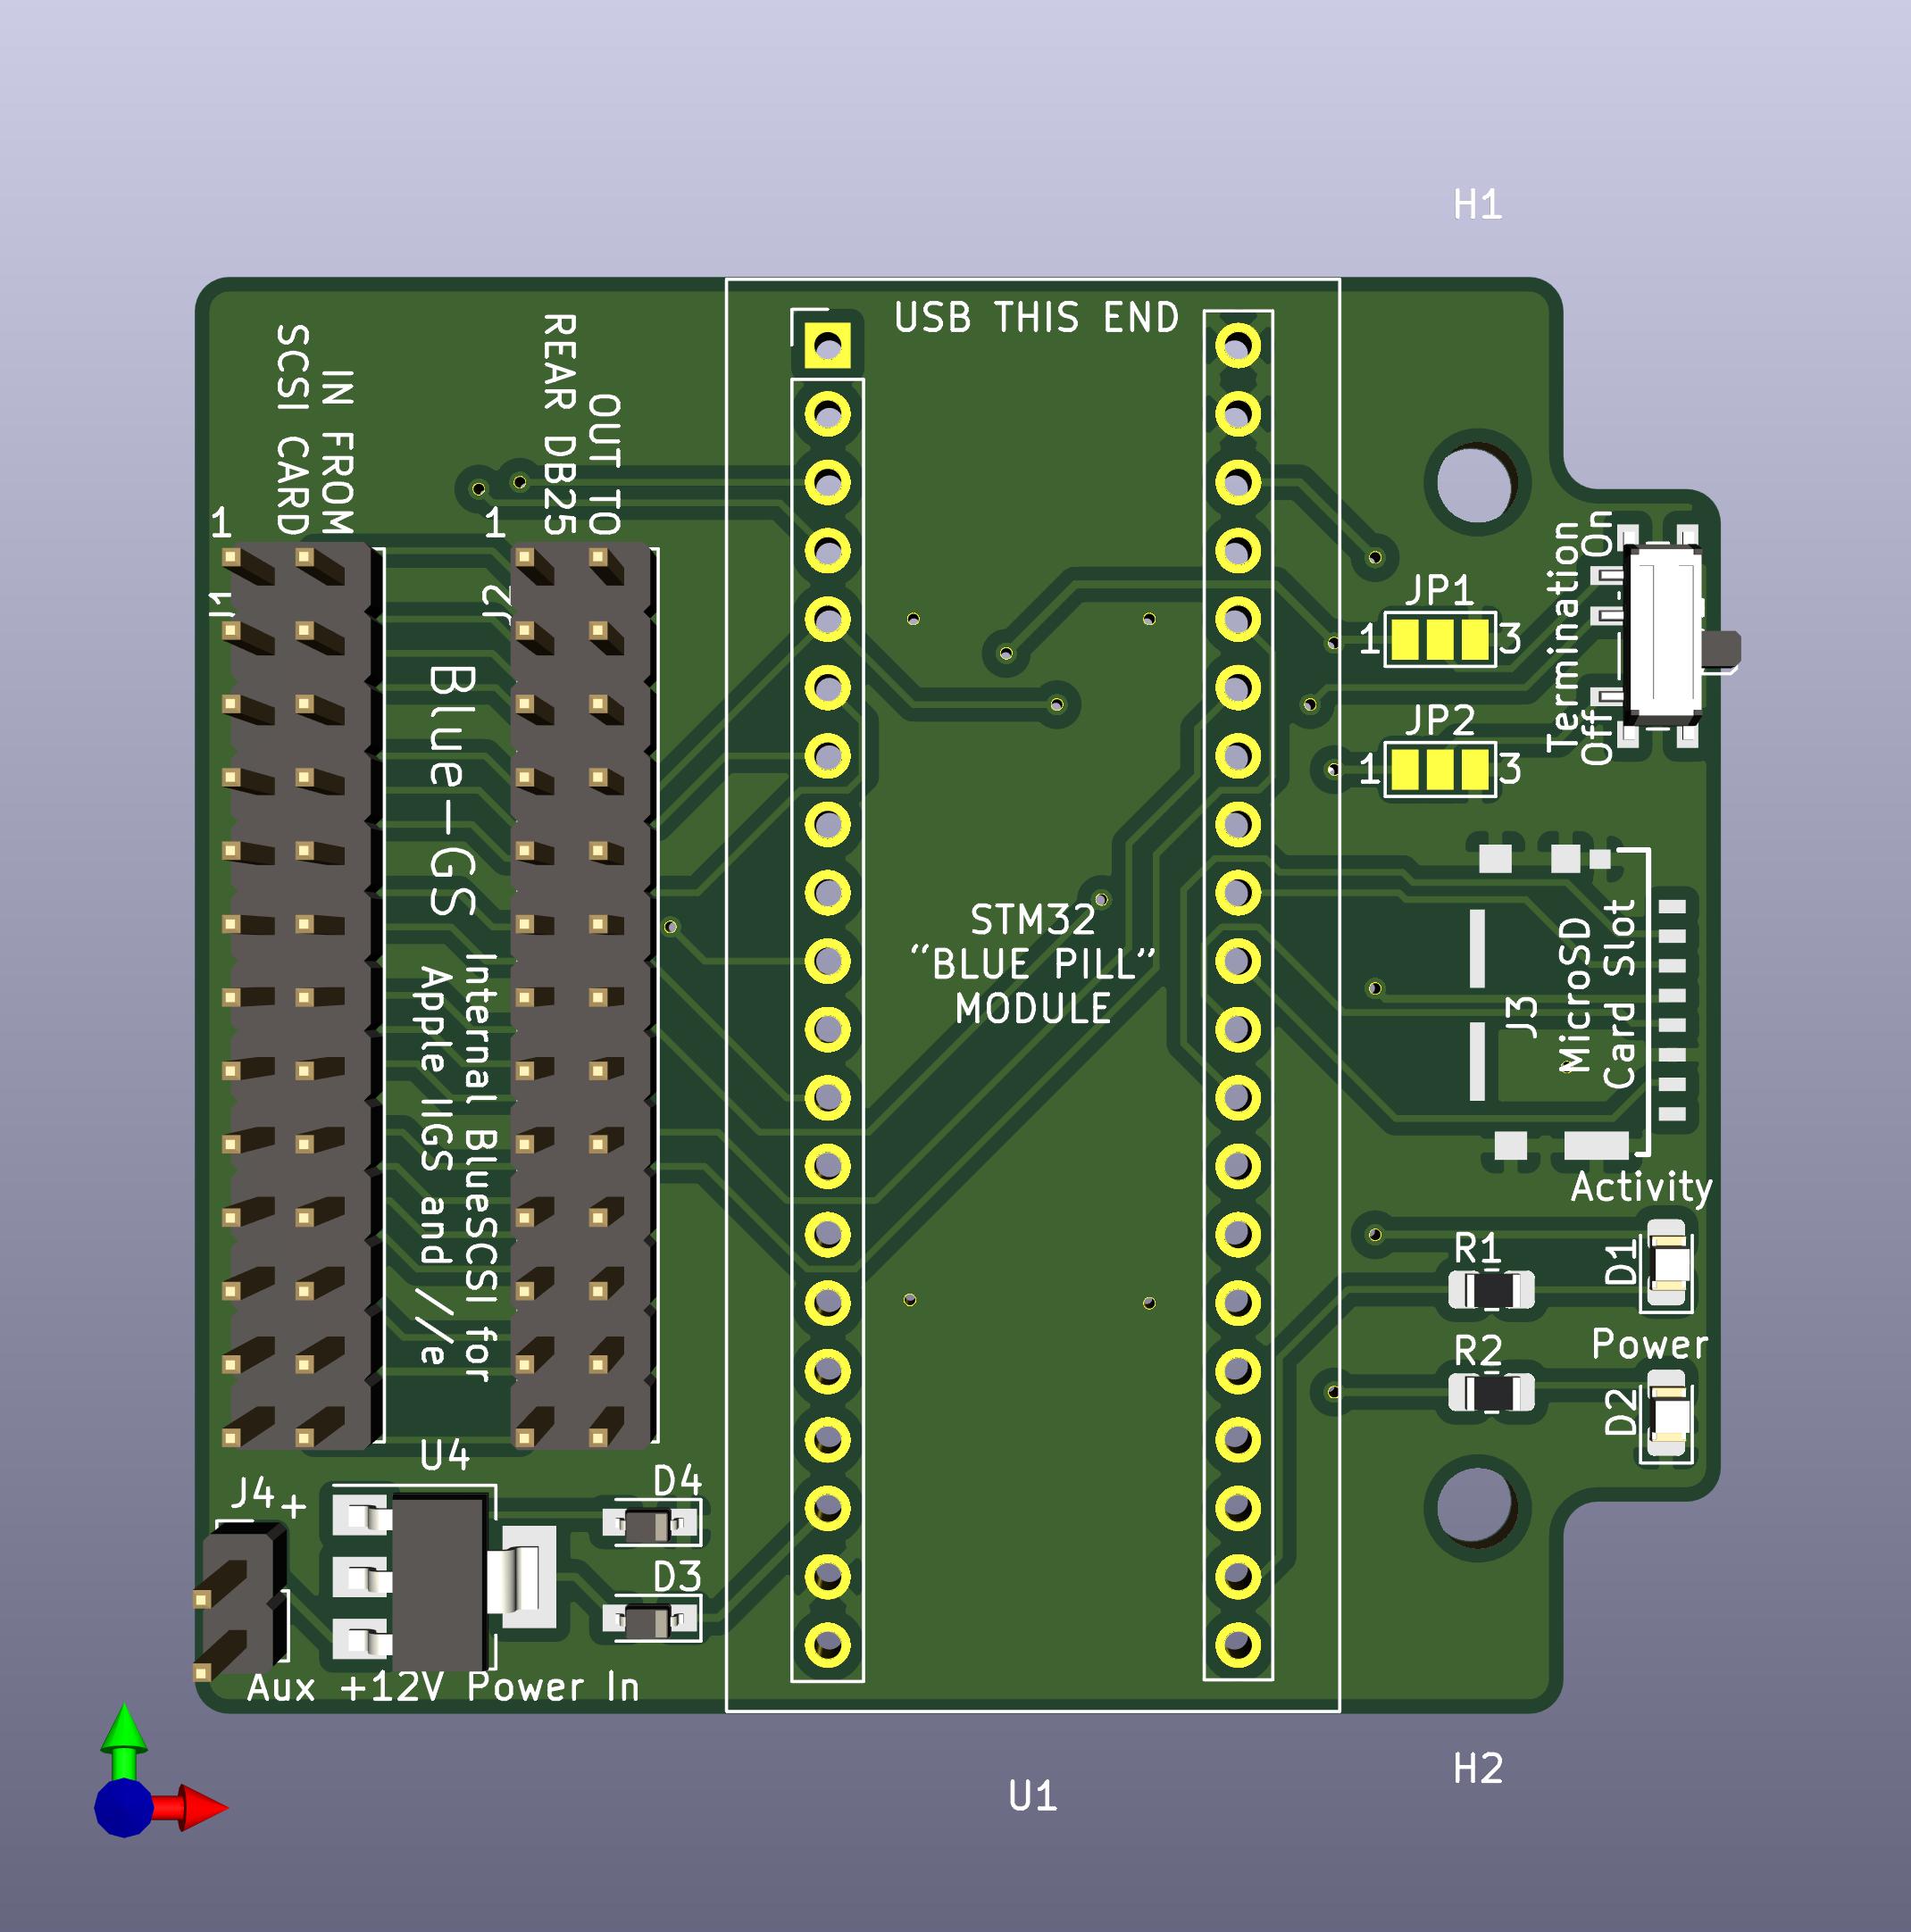 Rendering of front of board v1.2